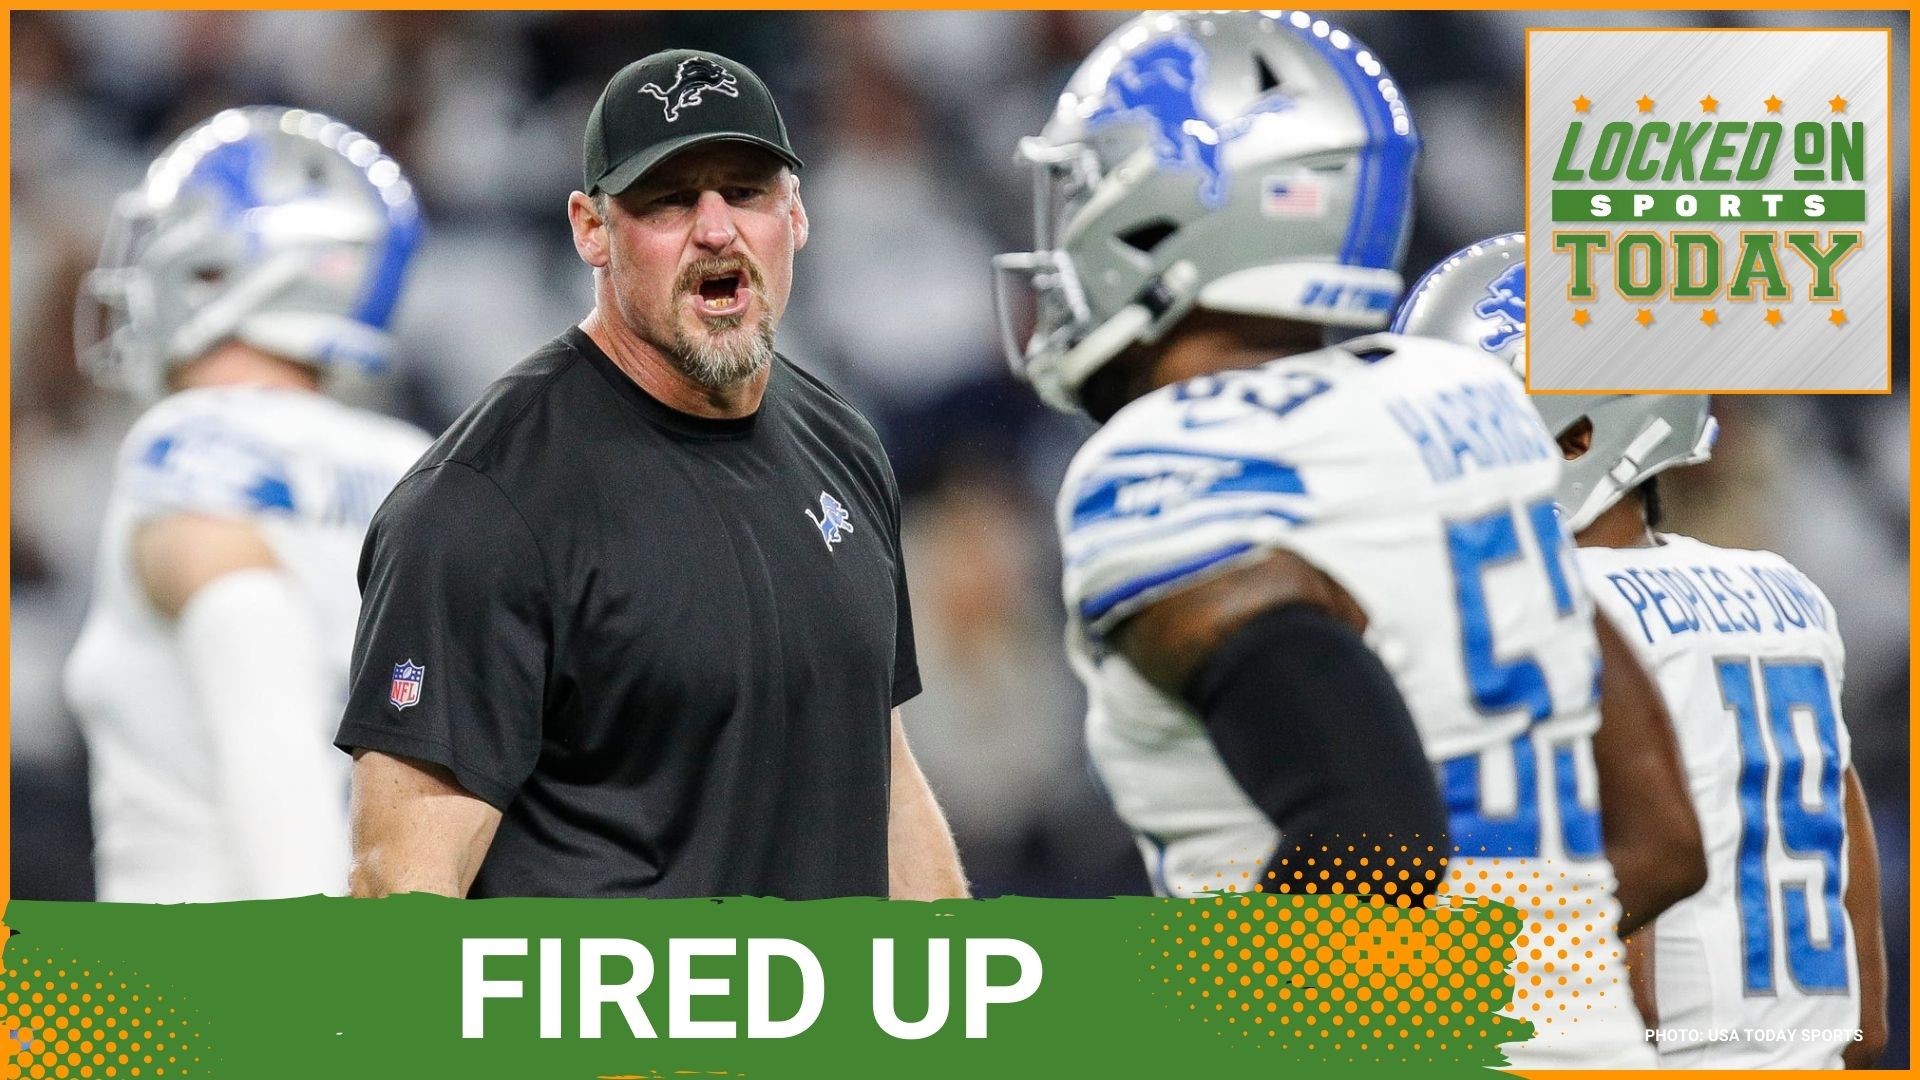 Discussing the day's top sports stories from the Lions possible path to victory against the 49ers to the Panthers next head coach and more.